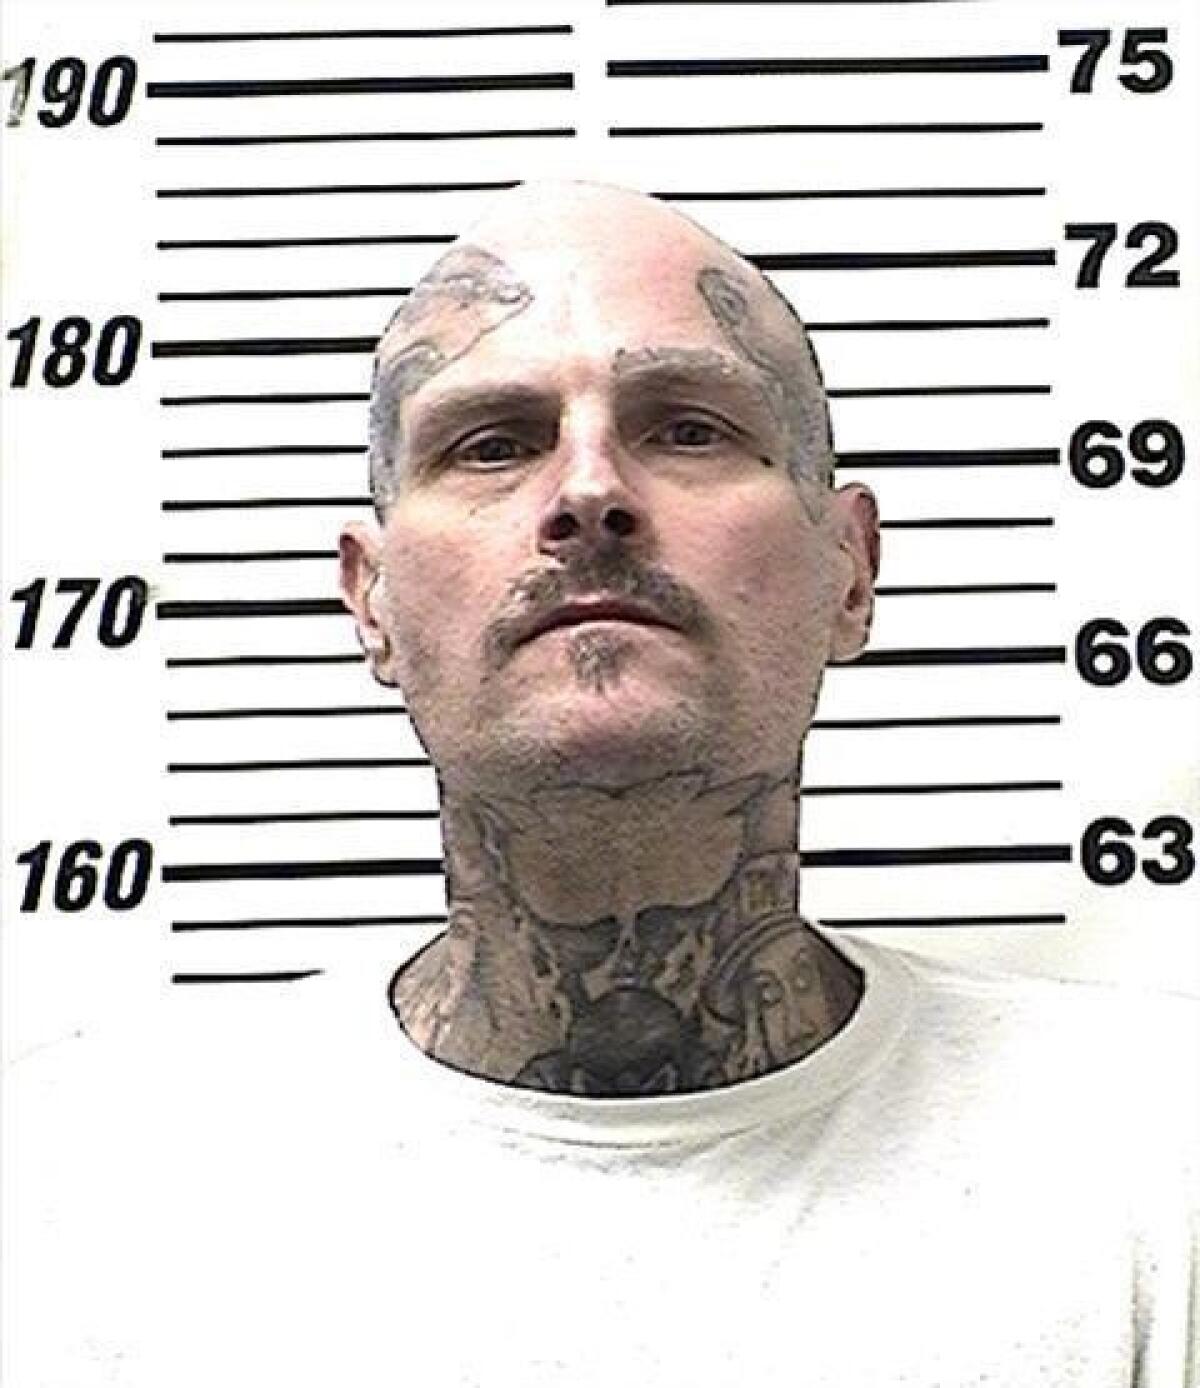 Brant Daniel, a member of the Aryan Brotherhood prison gang, agreed to plead 